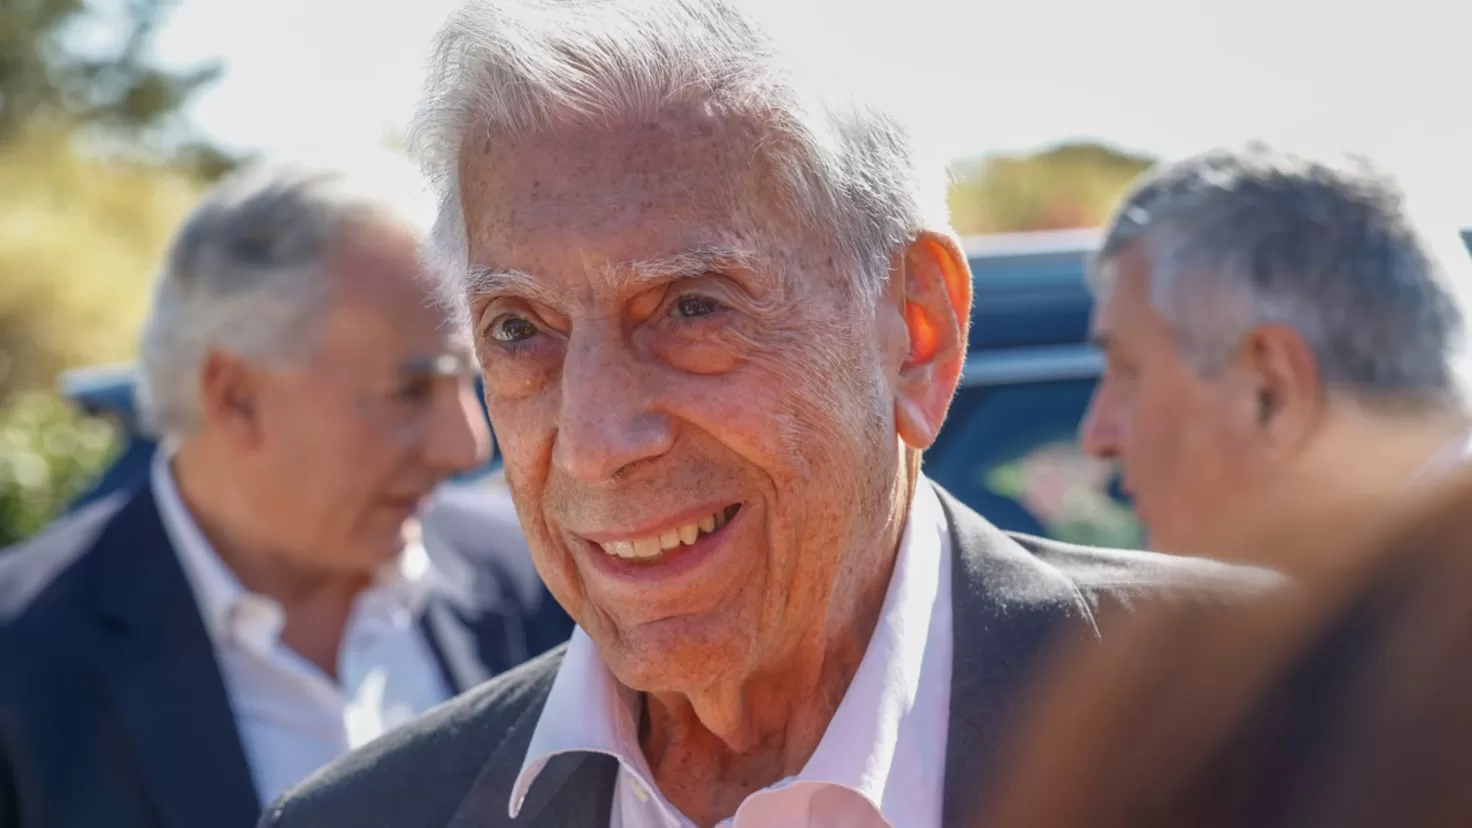 Mario Vargas Llosa reappears after doubts about his state of health
